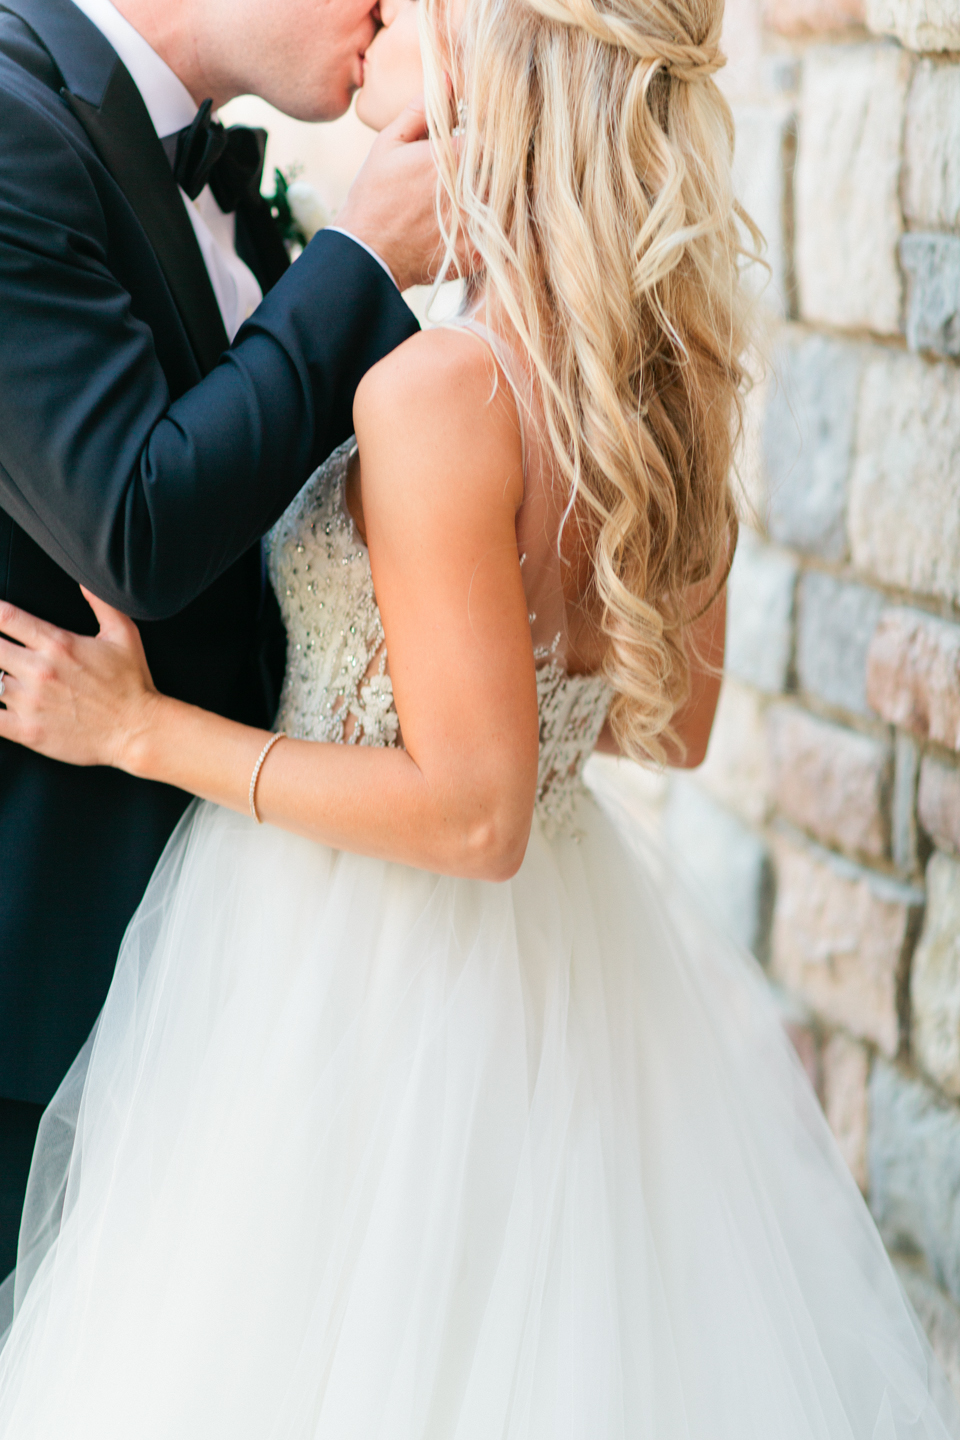 Image of a groom kissing his bride on their wedding day at TPC Sawgrass in Ponte Vedra, Florida